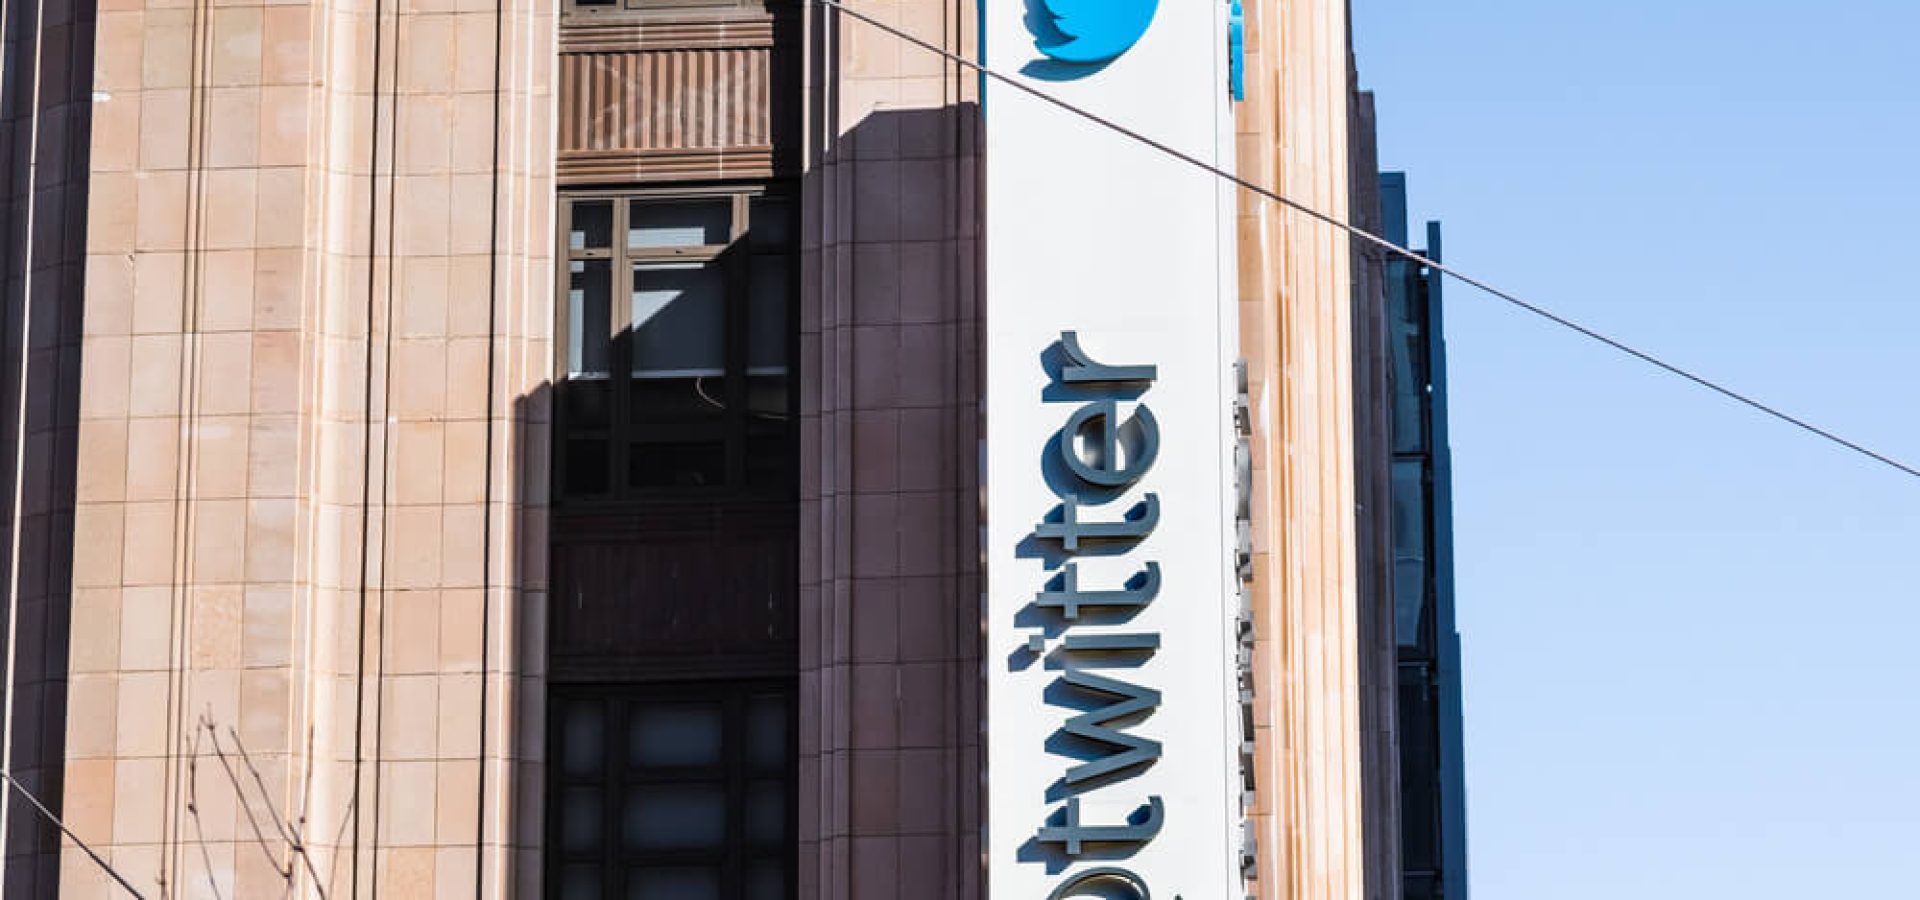 Twitter building with logo